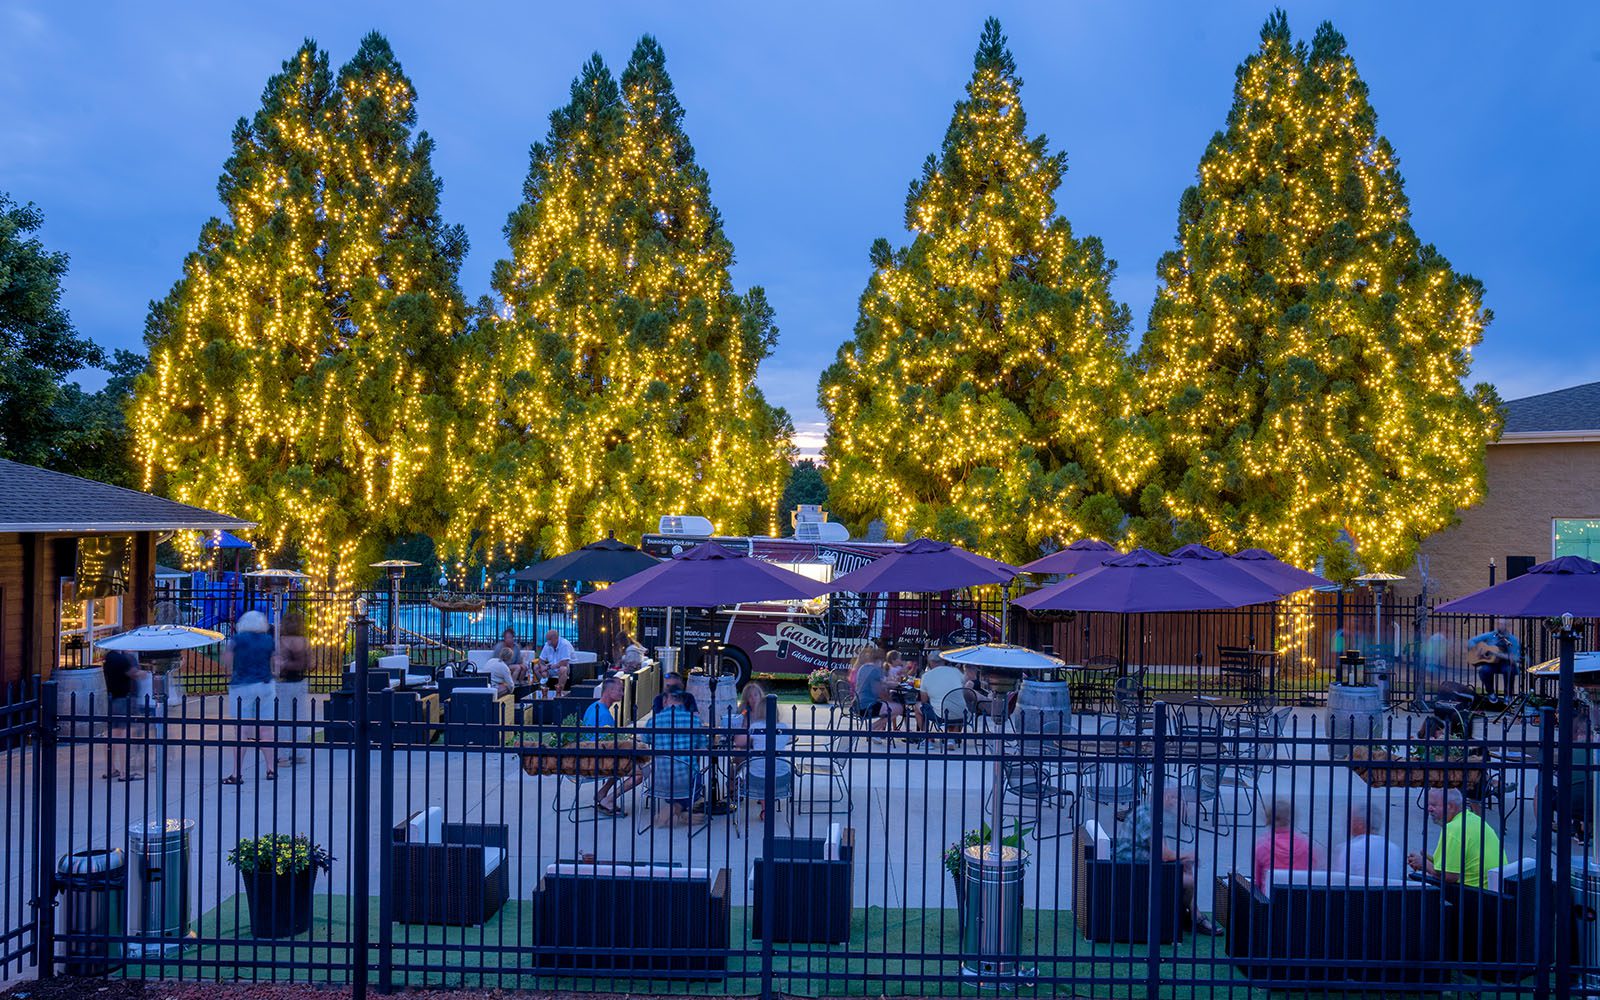 Bottles & Bites is an open air wine bar with a food truck, located at Mariners Landing.